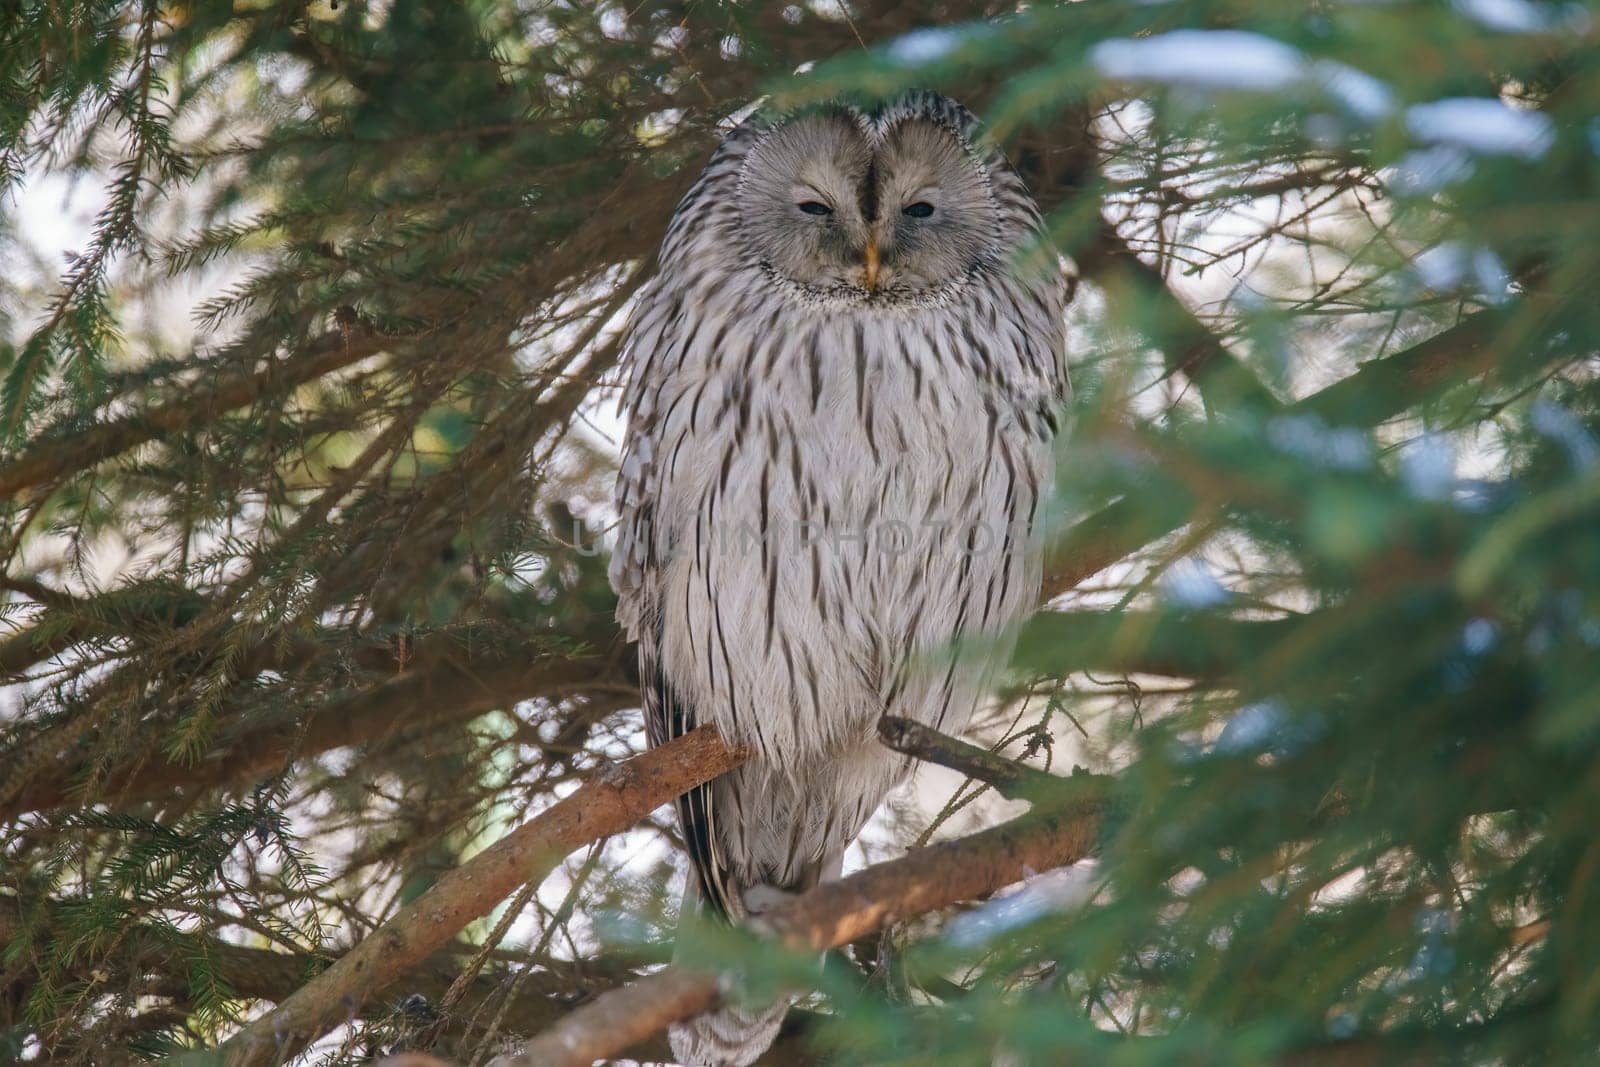 an Ural owl sits in a spruce tree and keeps calm